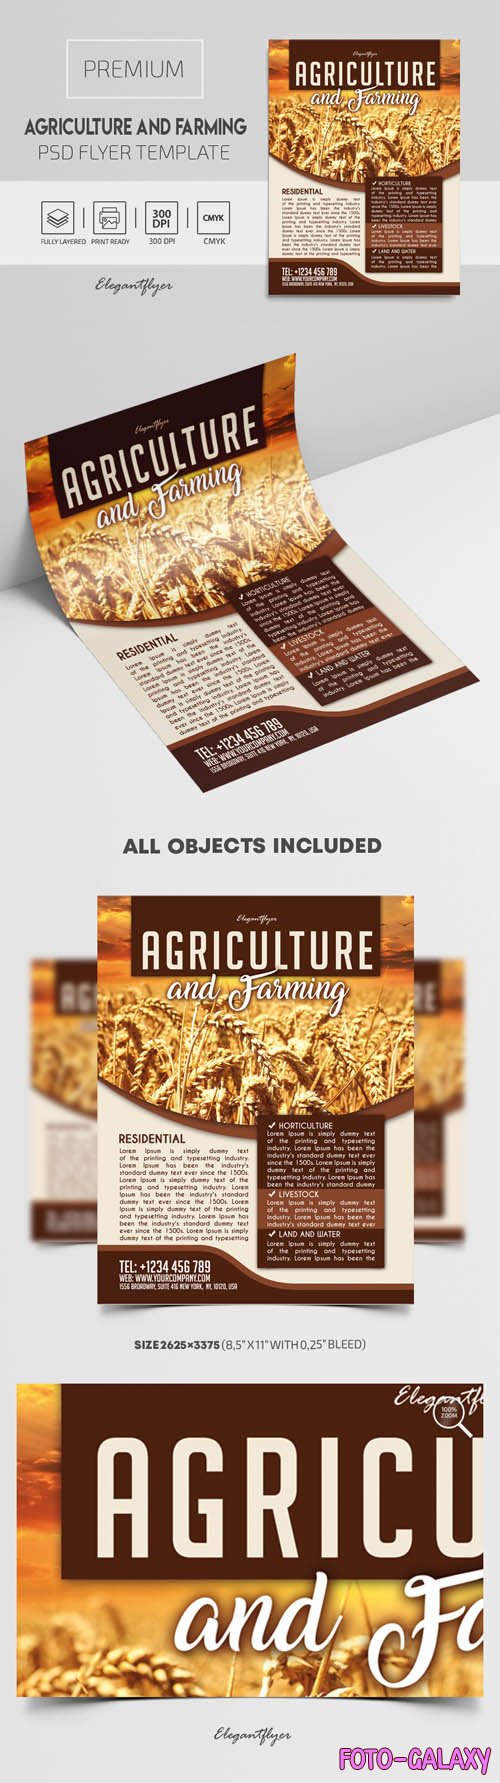 Agriculture and Farming Premium PSD Flyer Template